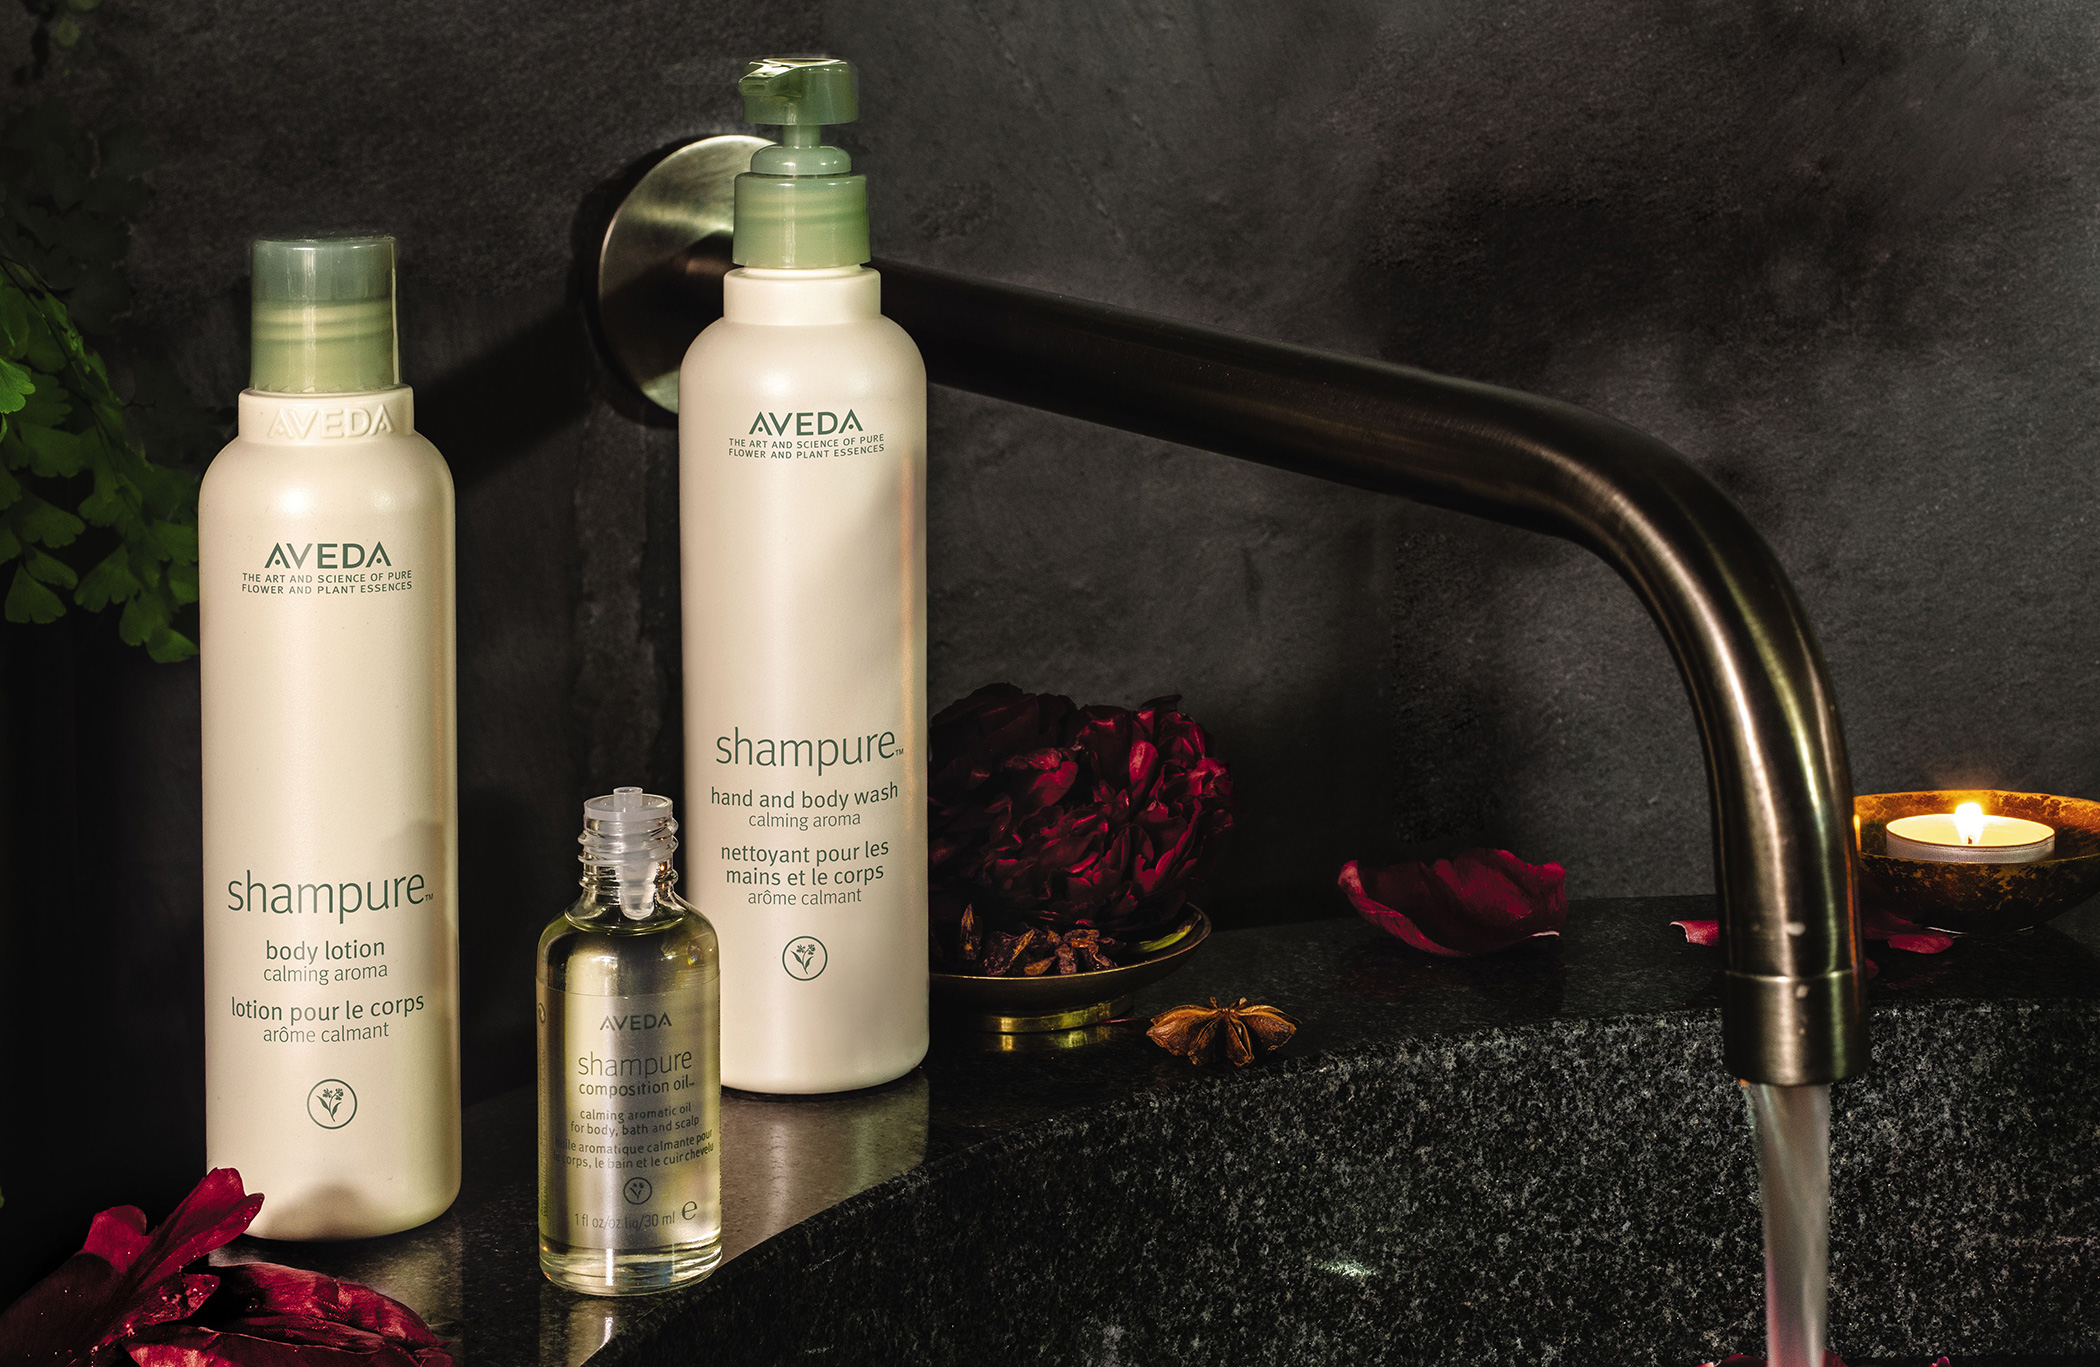 Two aveda shampure products on a dark bathroom counter with a faucet, rose petals, and a lit candle in the background. - K. Charles & Co. in San Antonio and Schertz, TX